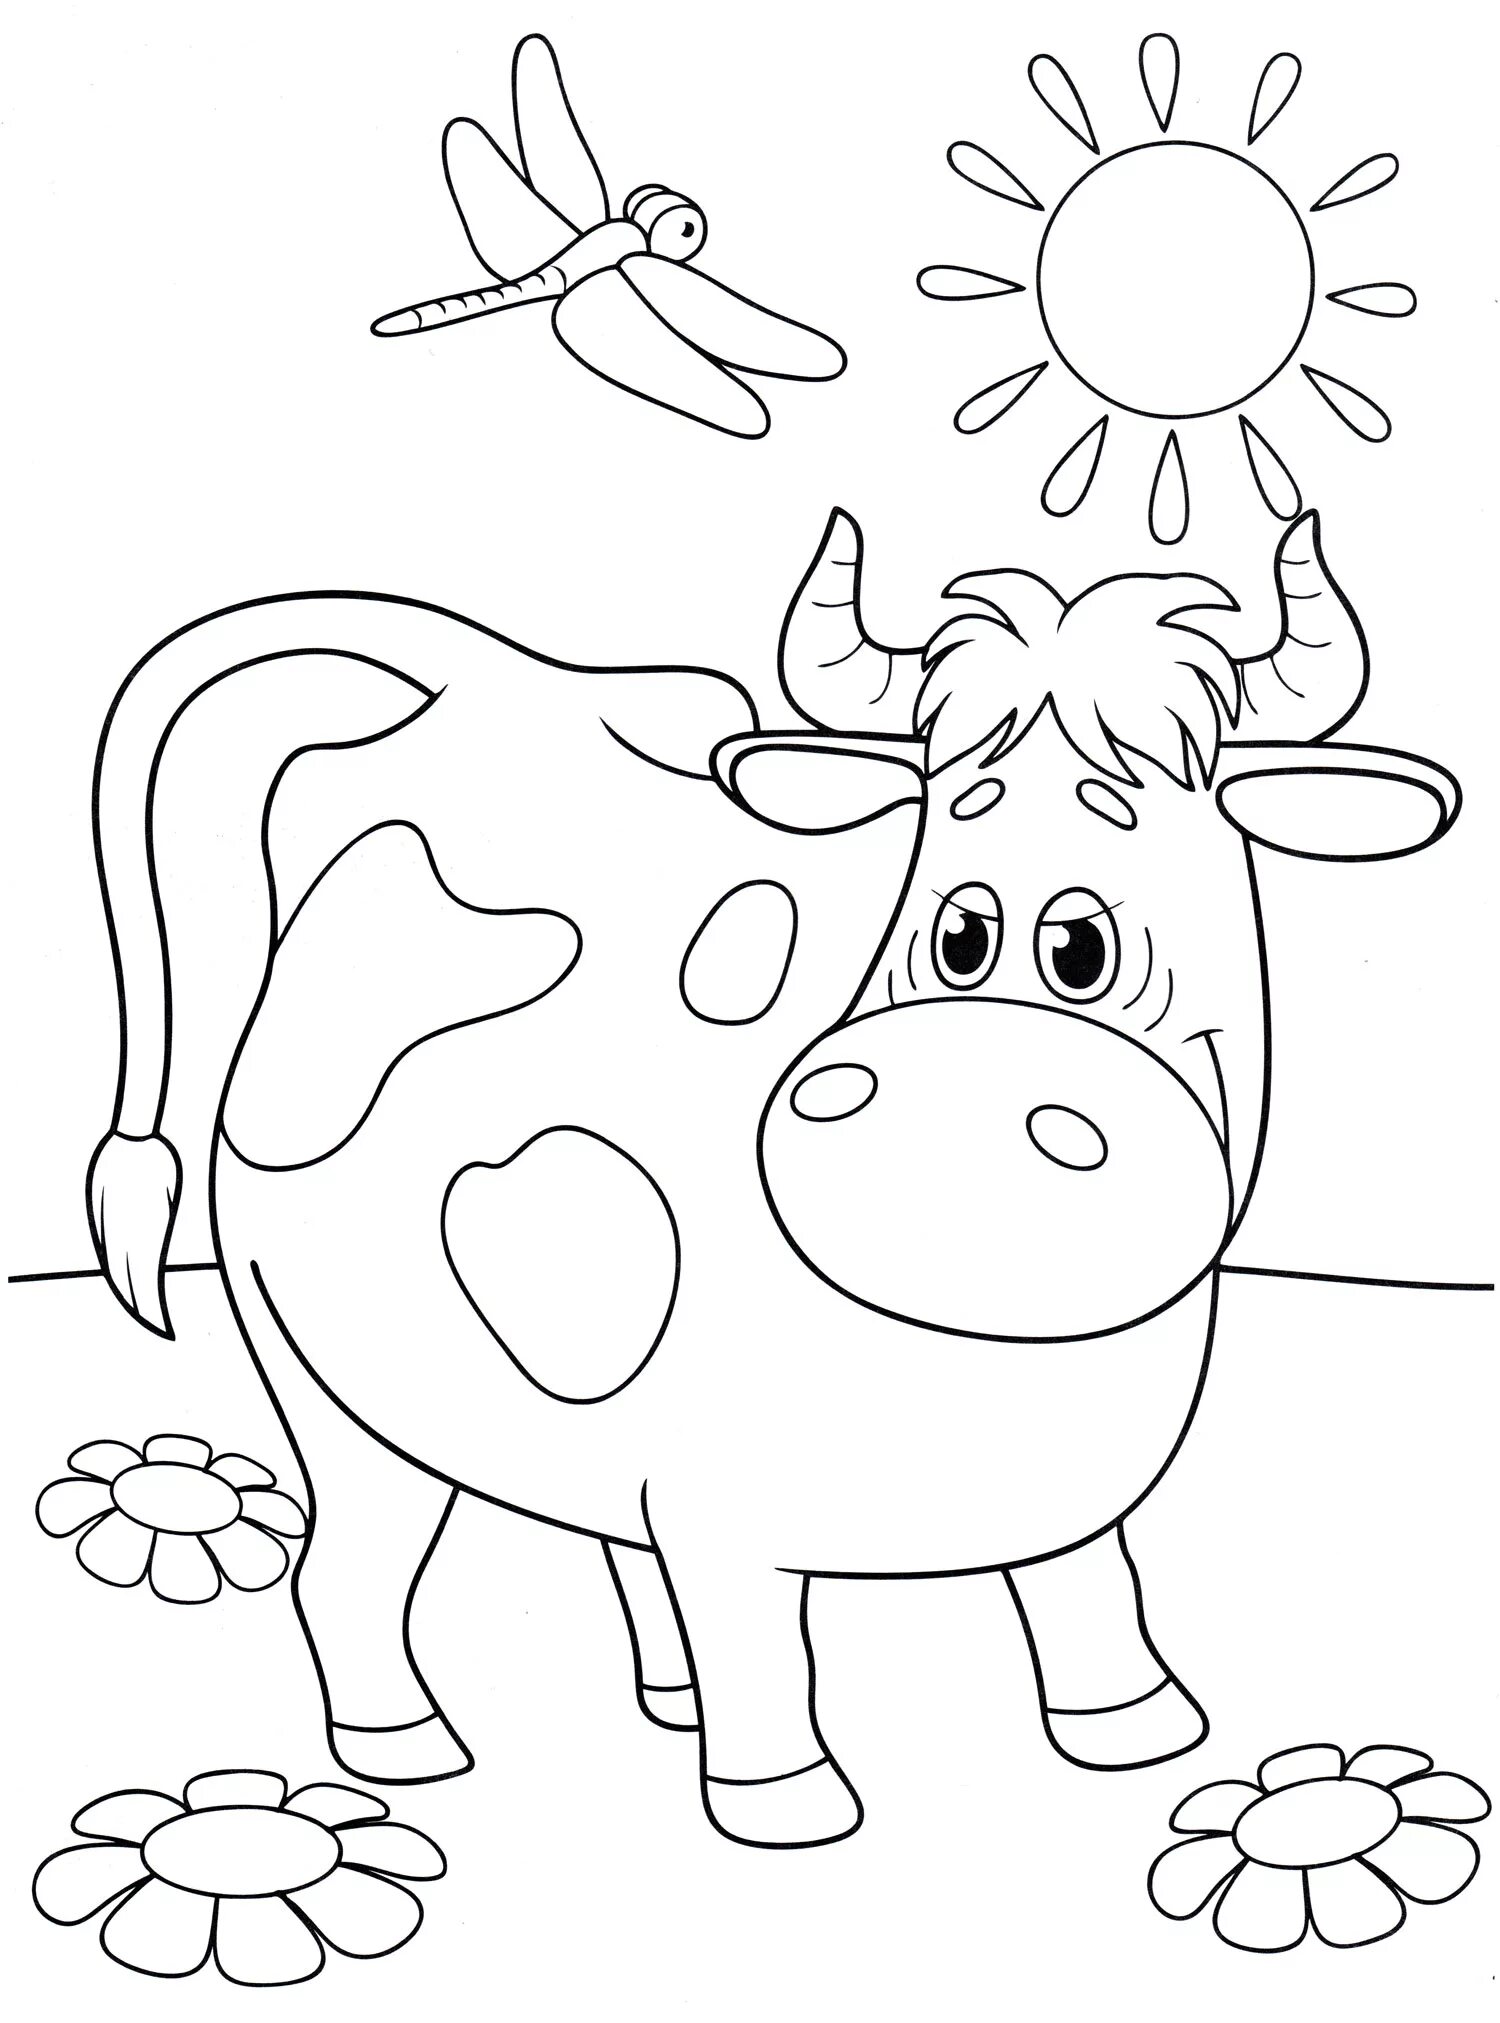 Cow humorous coloring book for toddlers 2 3 years old